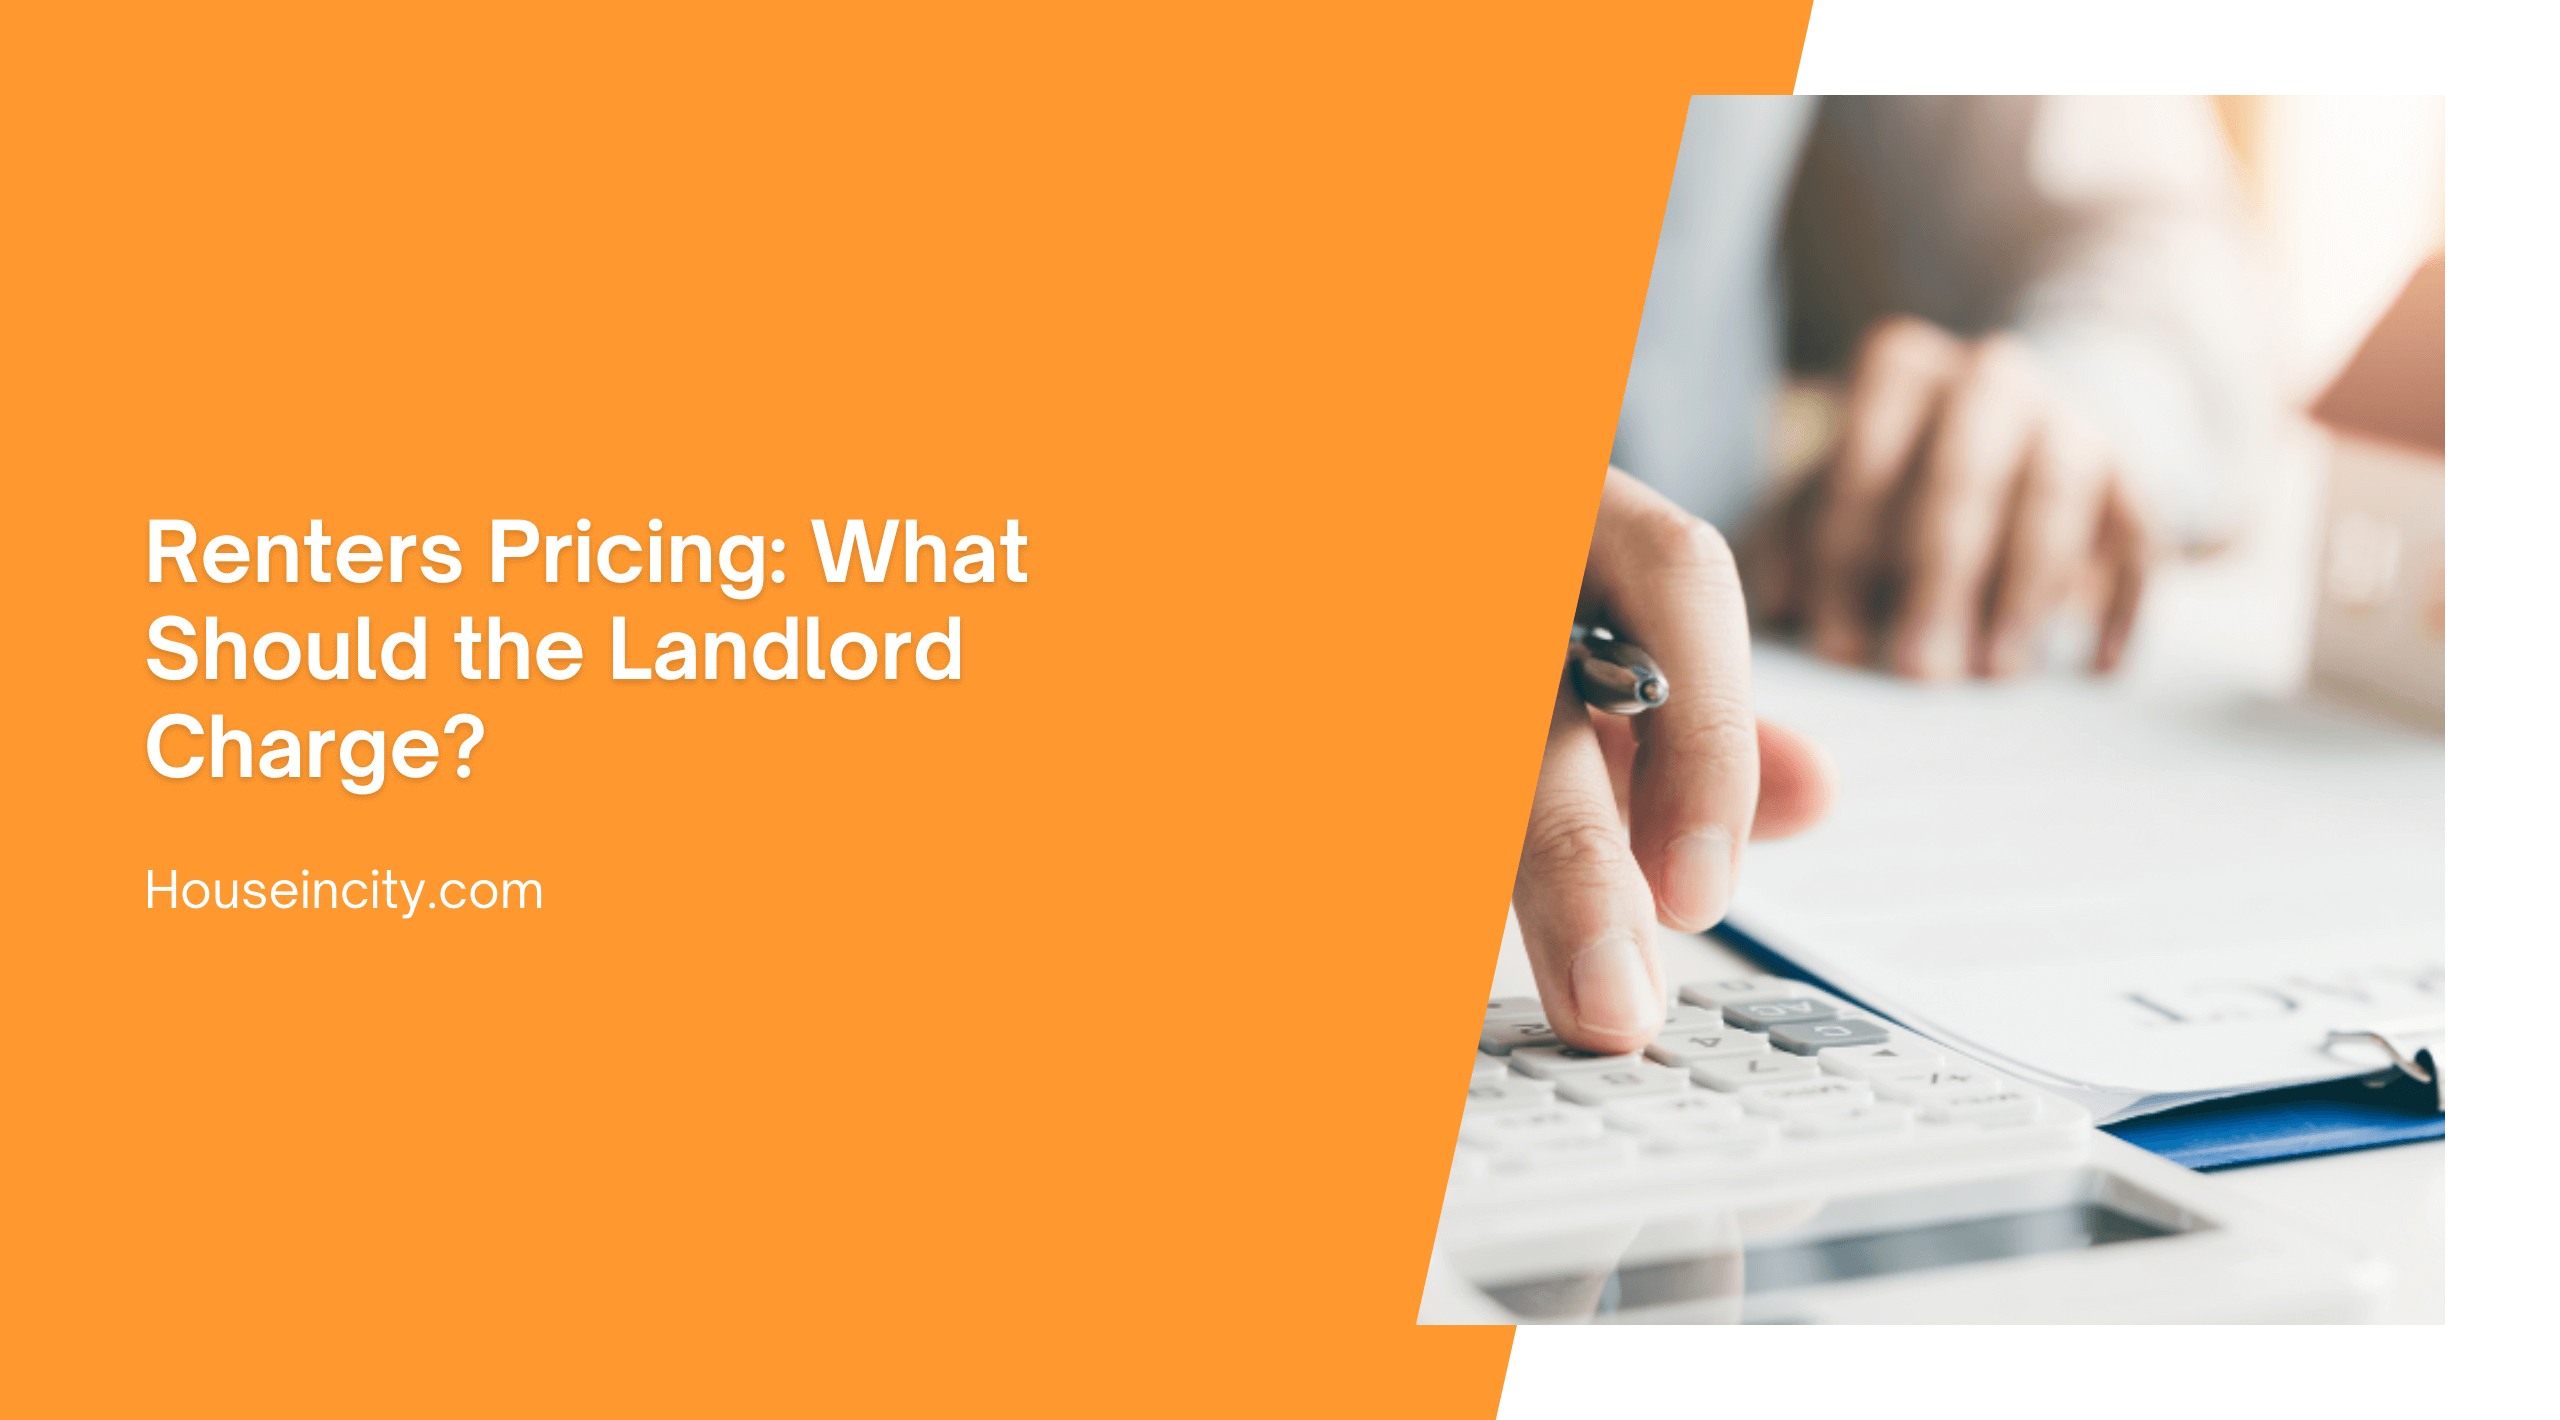 Renters Pricing: What Should the Landlord Charge?